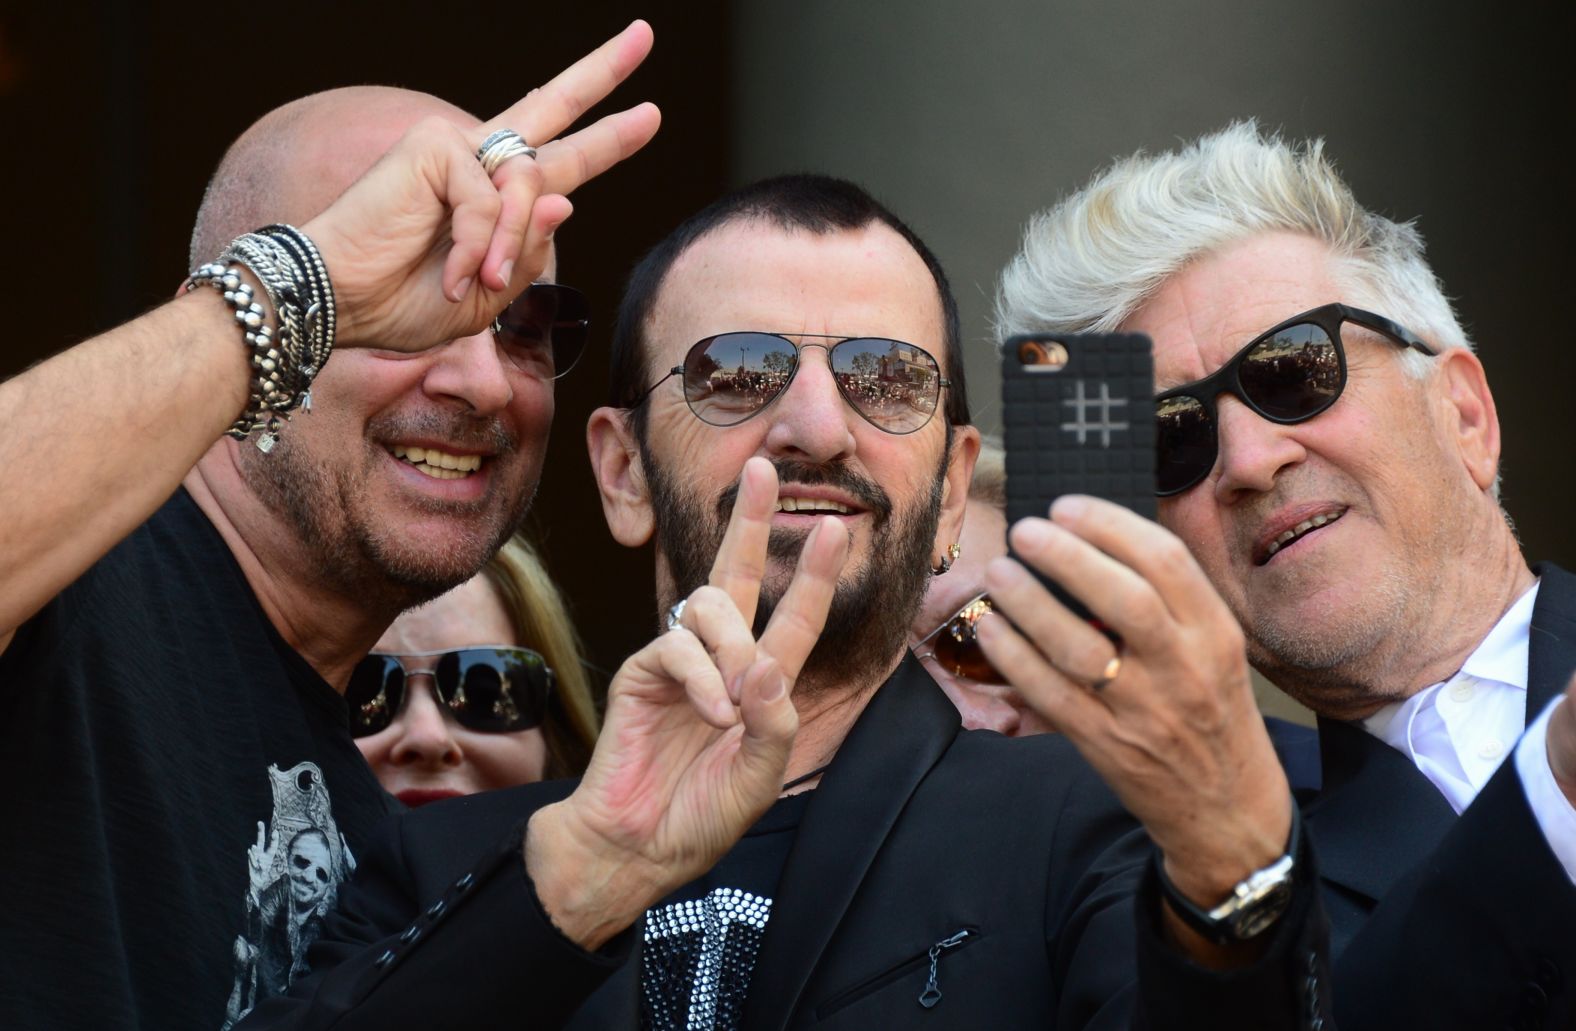 Starr takes a selfie with fashion designer John Varvatos, left, and film director David Lynch while celebrating his 74th birthday in July 2014. Starr's wife, Barbara, is in the back.